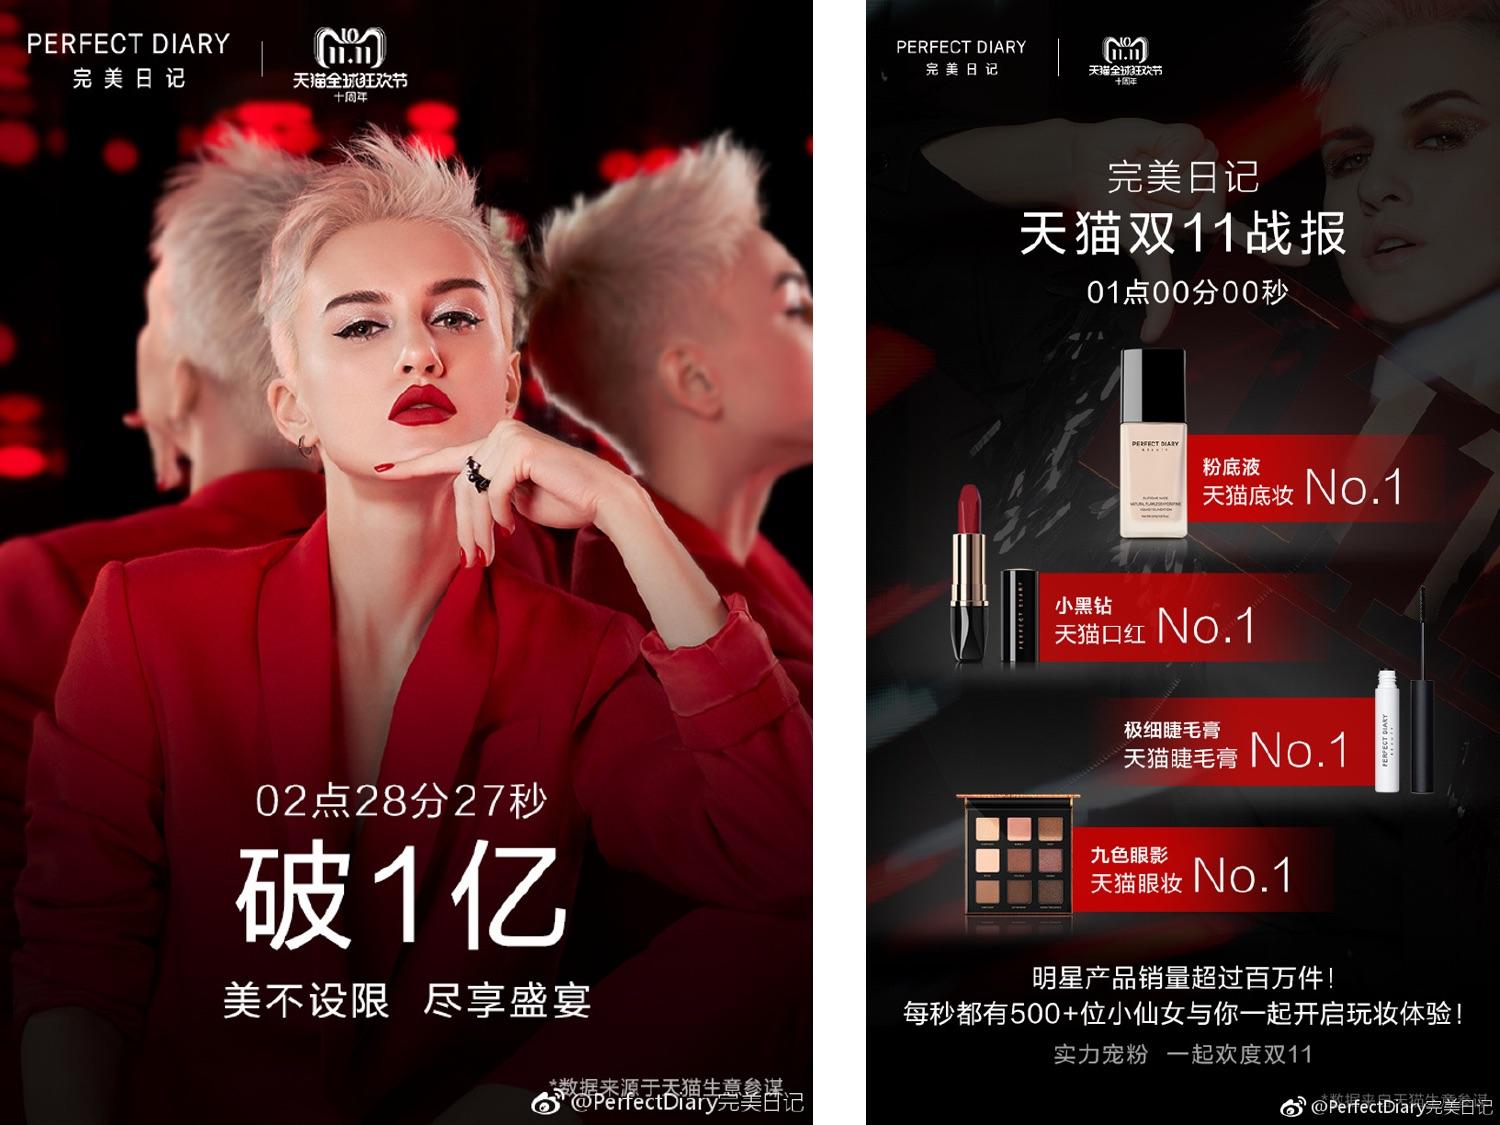 Perfect Diary Become a Top Cosmetic Brand in China